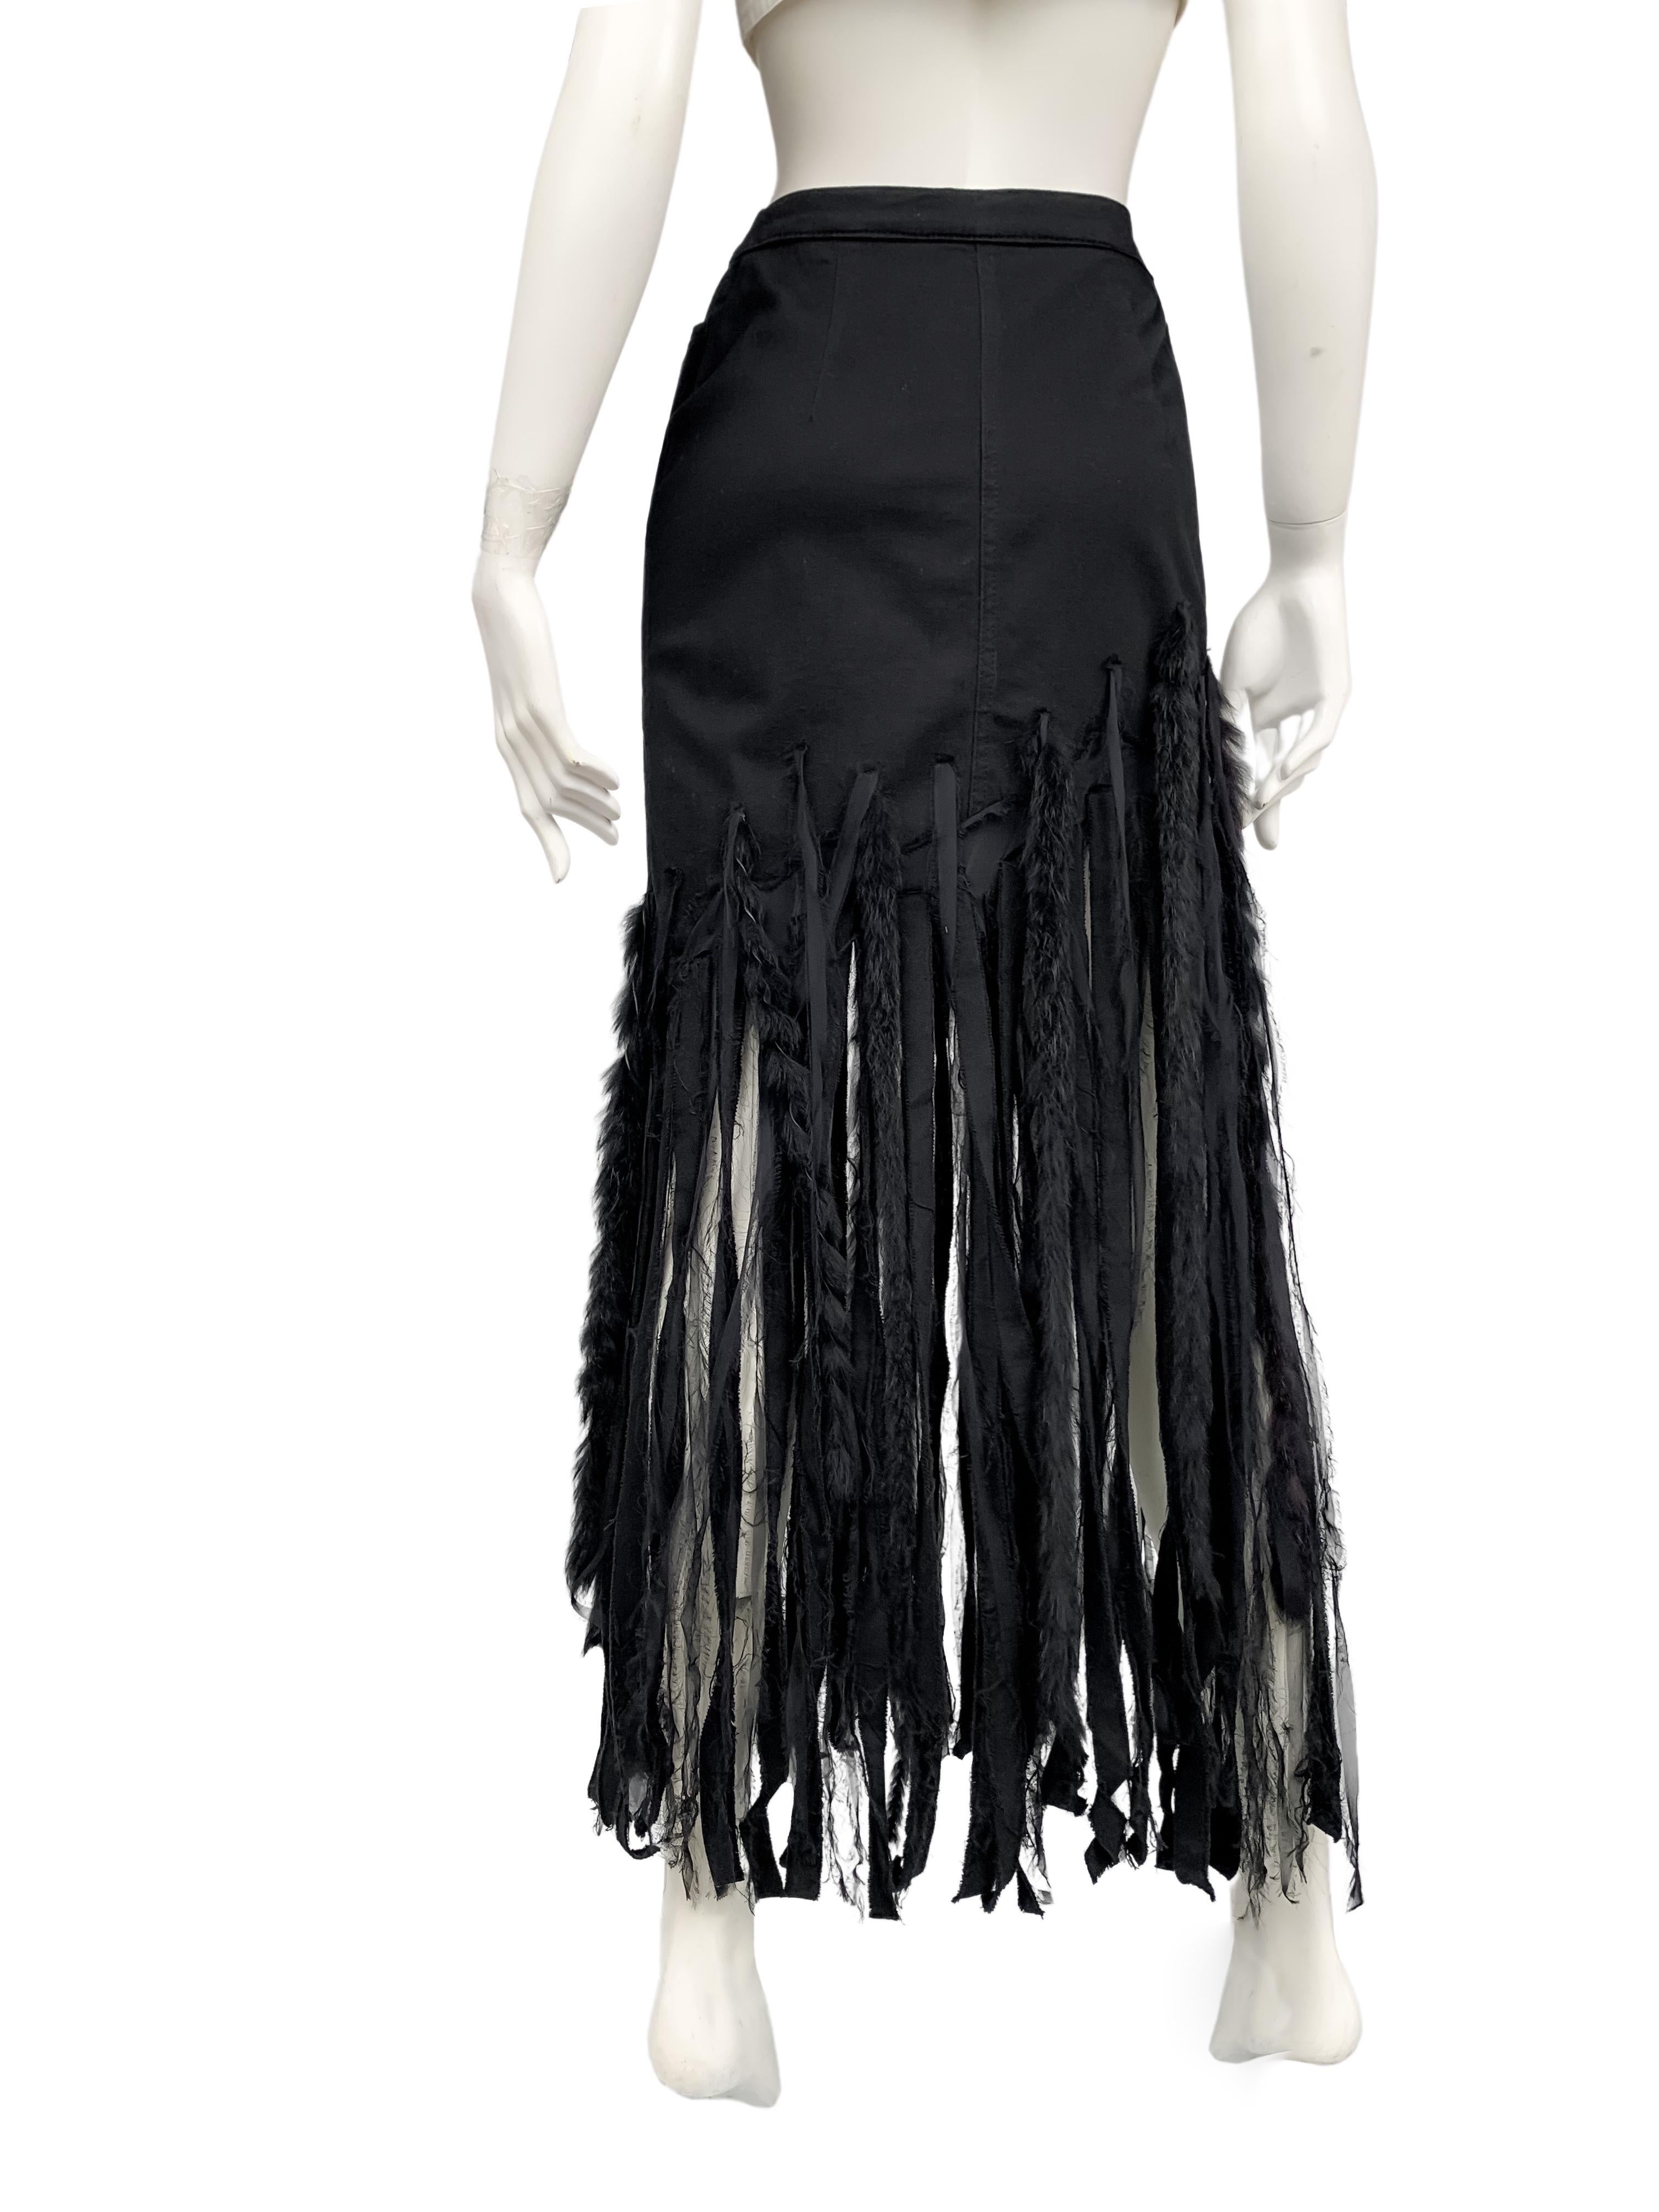 Ungaro 1990s vintage extravagant fringed maxi skirt with details in faux fur 2